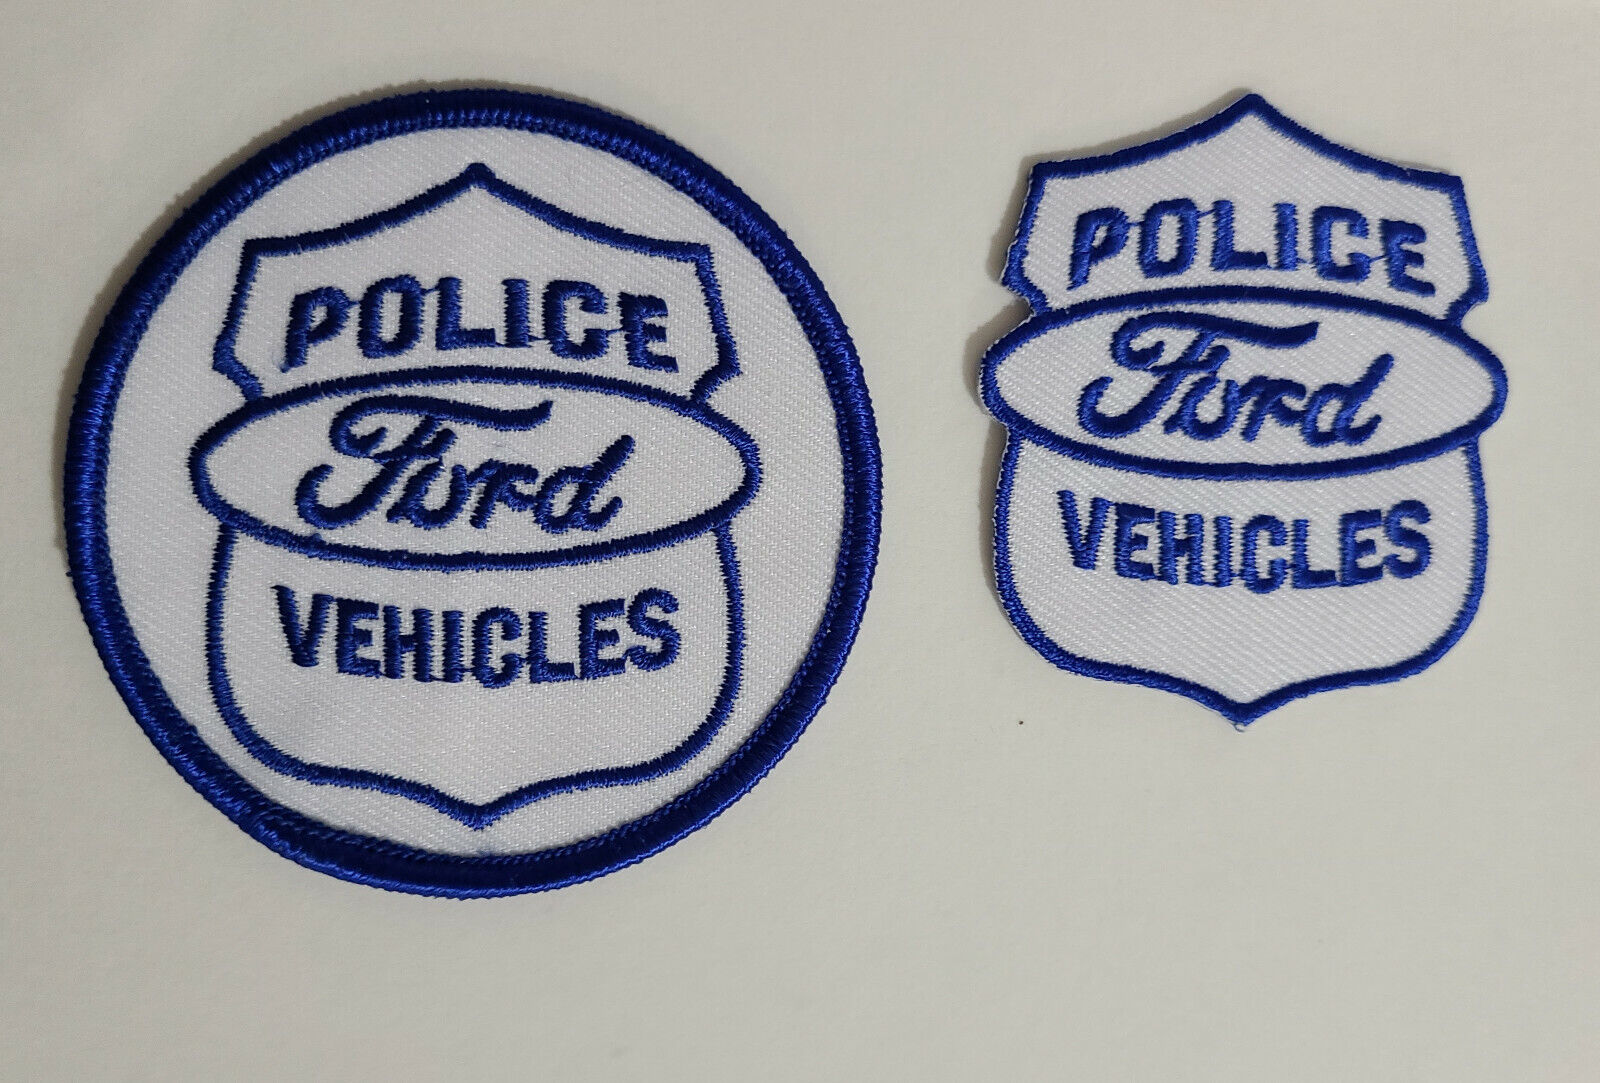   Ford Mustang Factory Police Vehicle Patch for Jacket or Cap/New